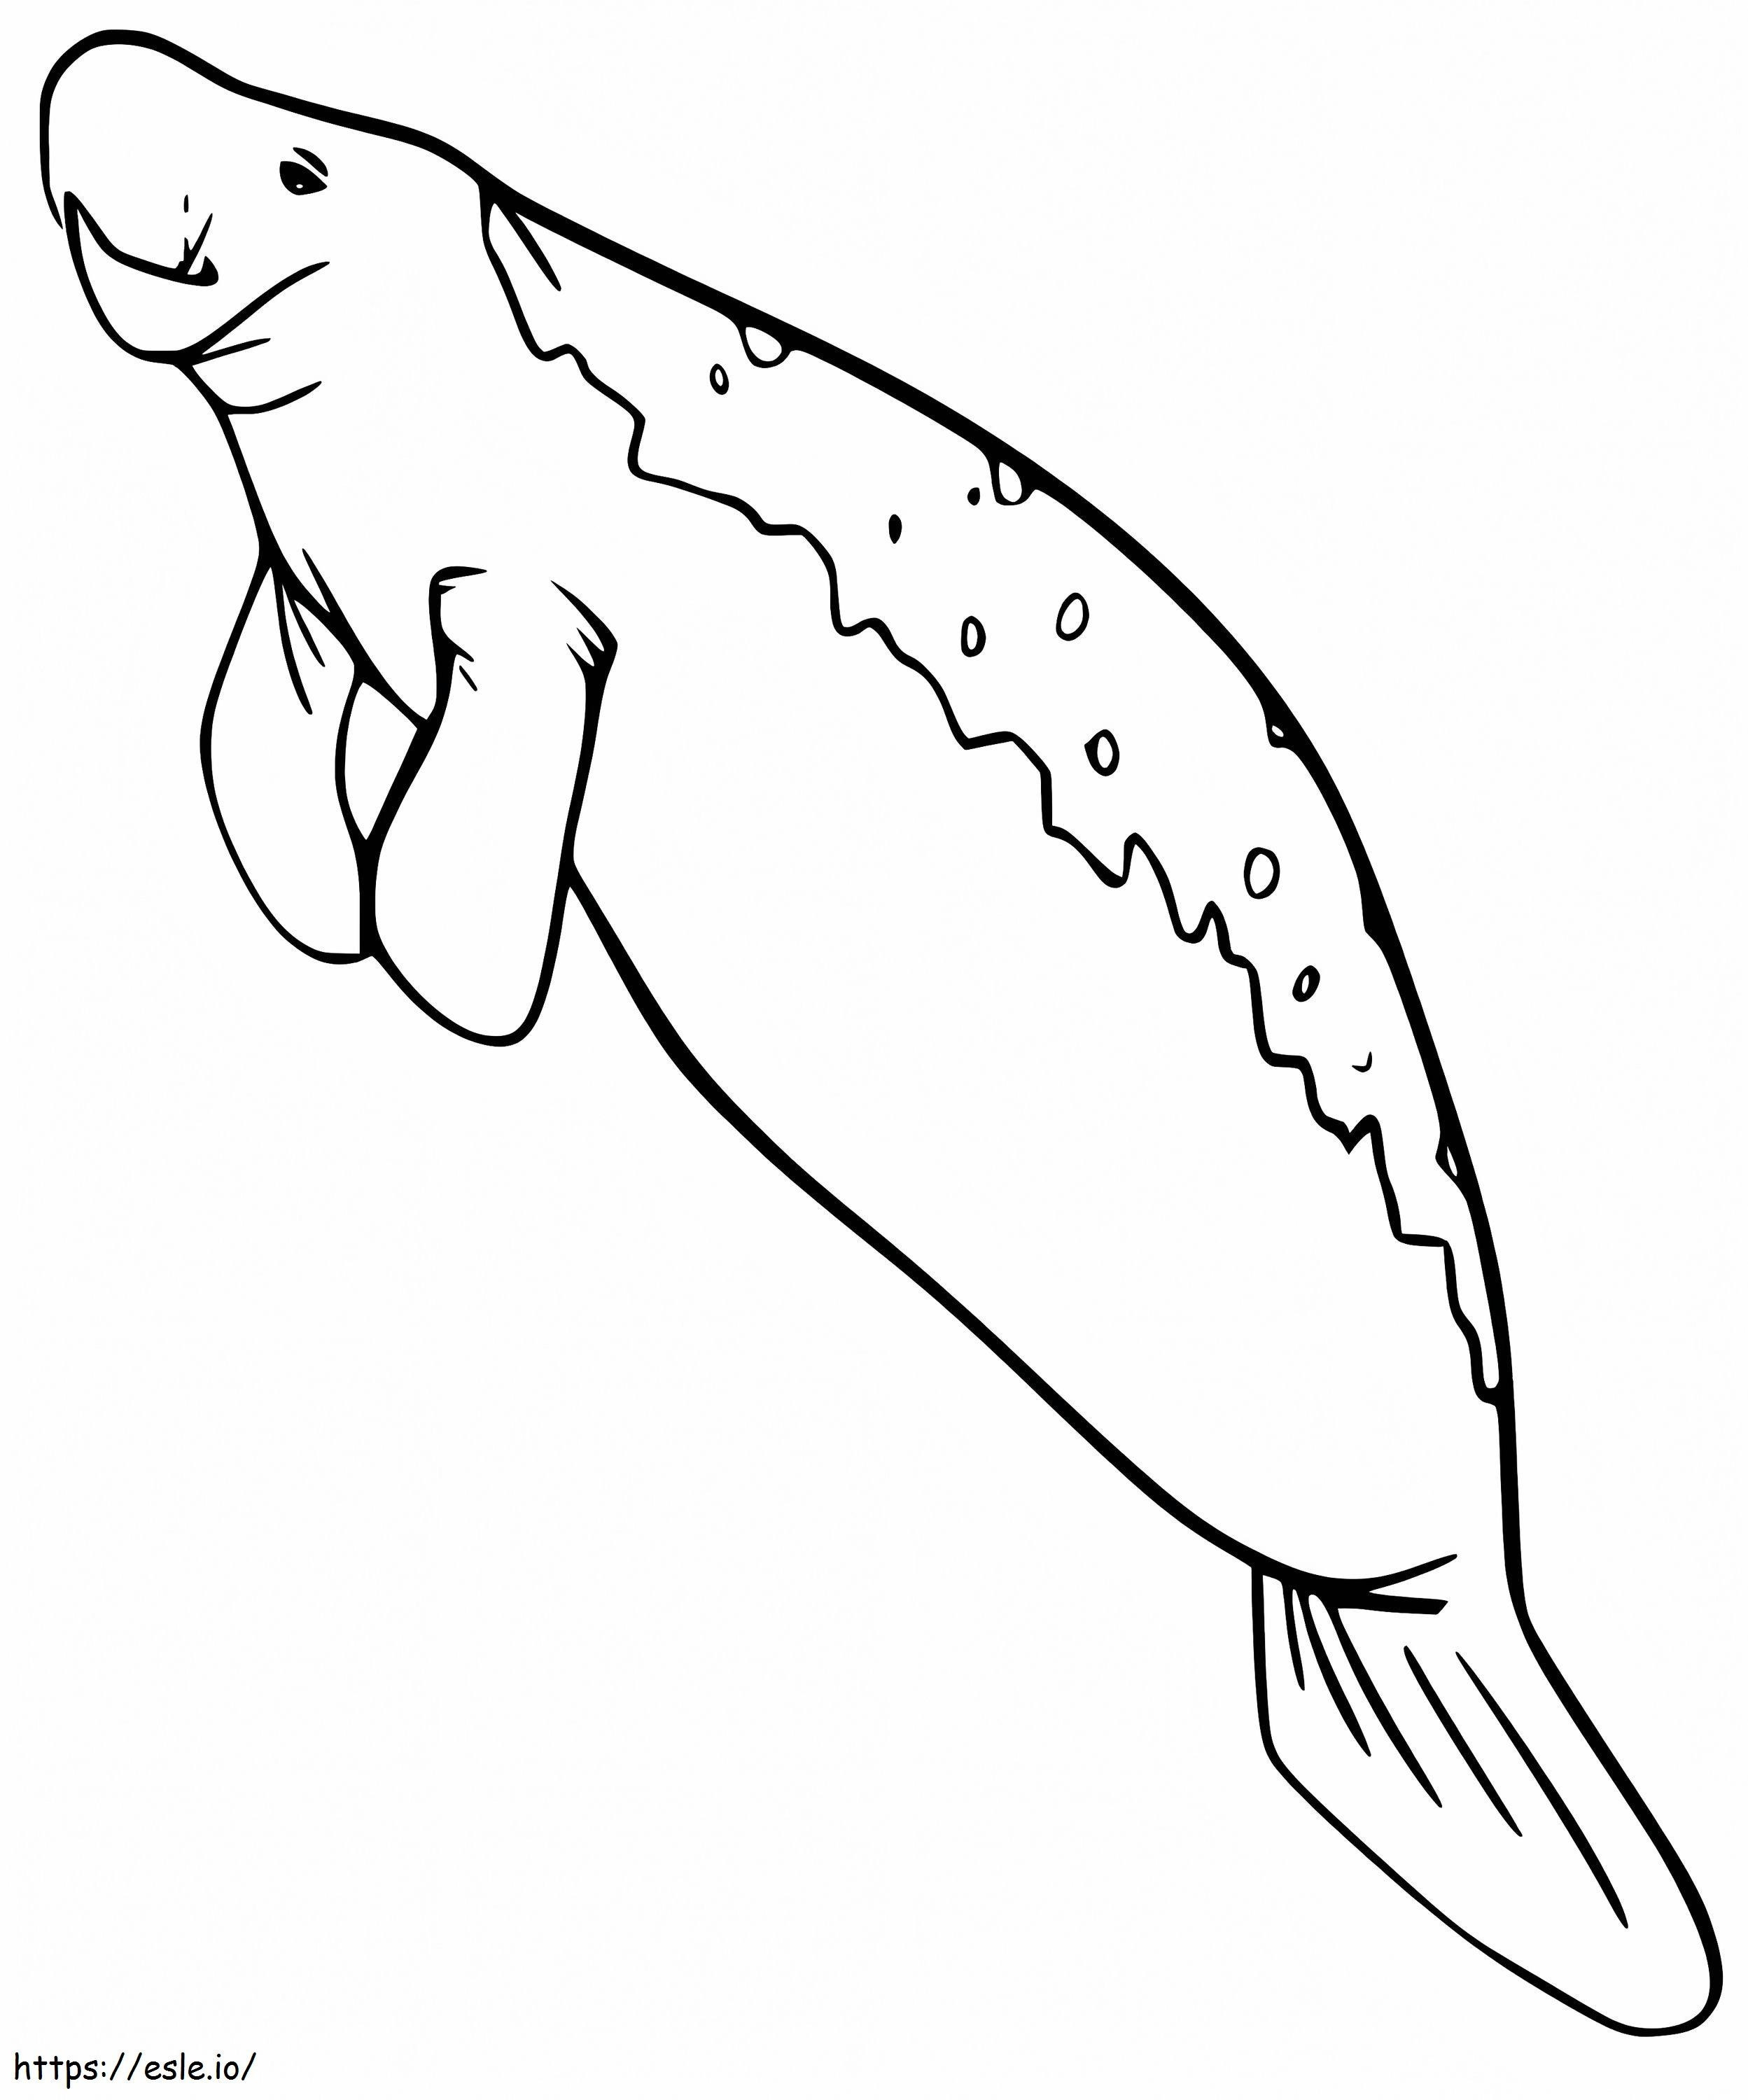 Manatee 2 coloring page